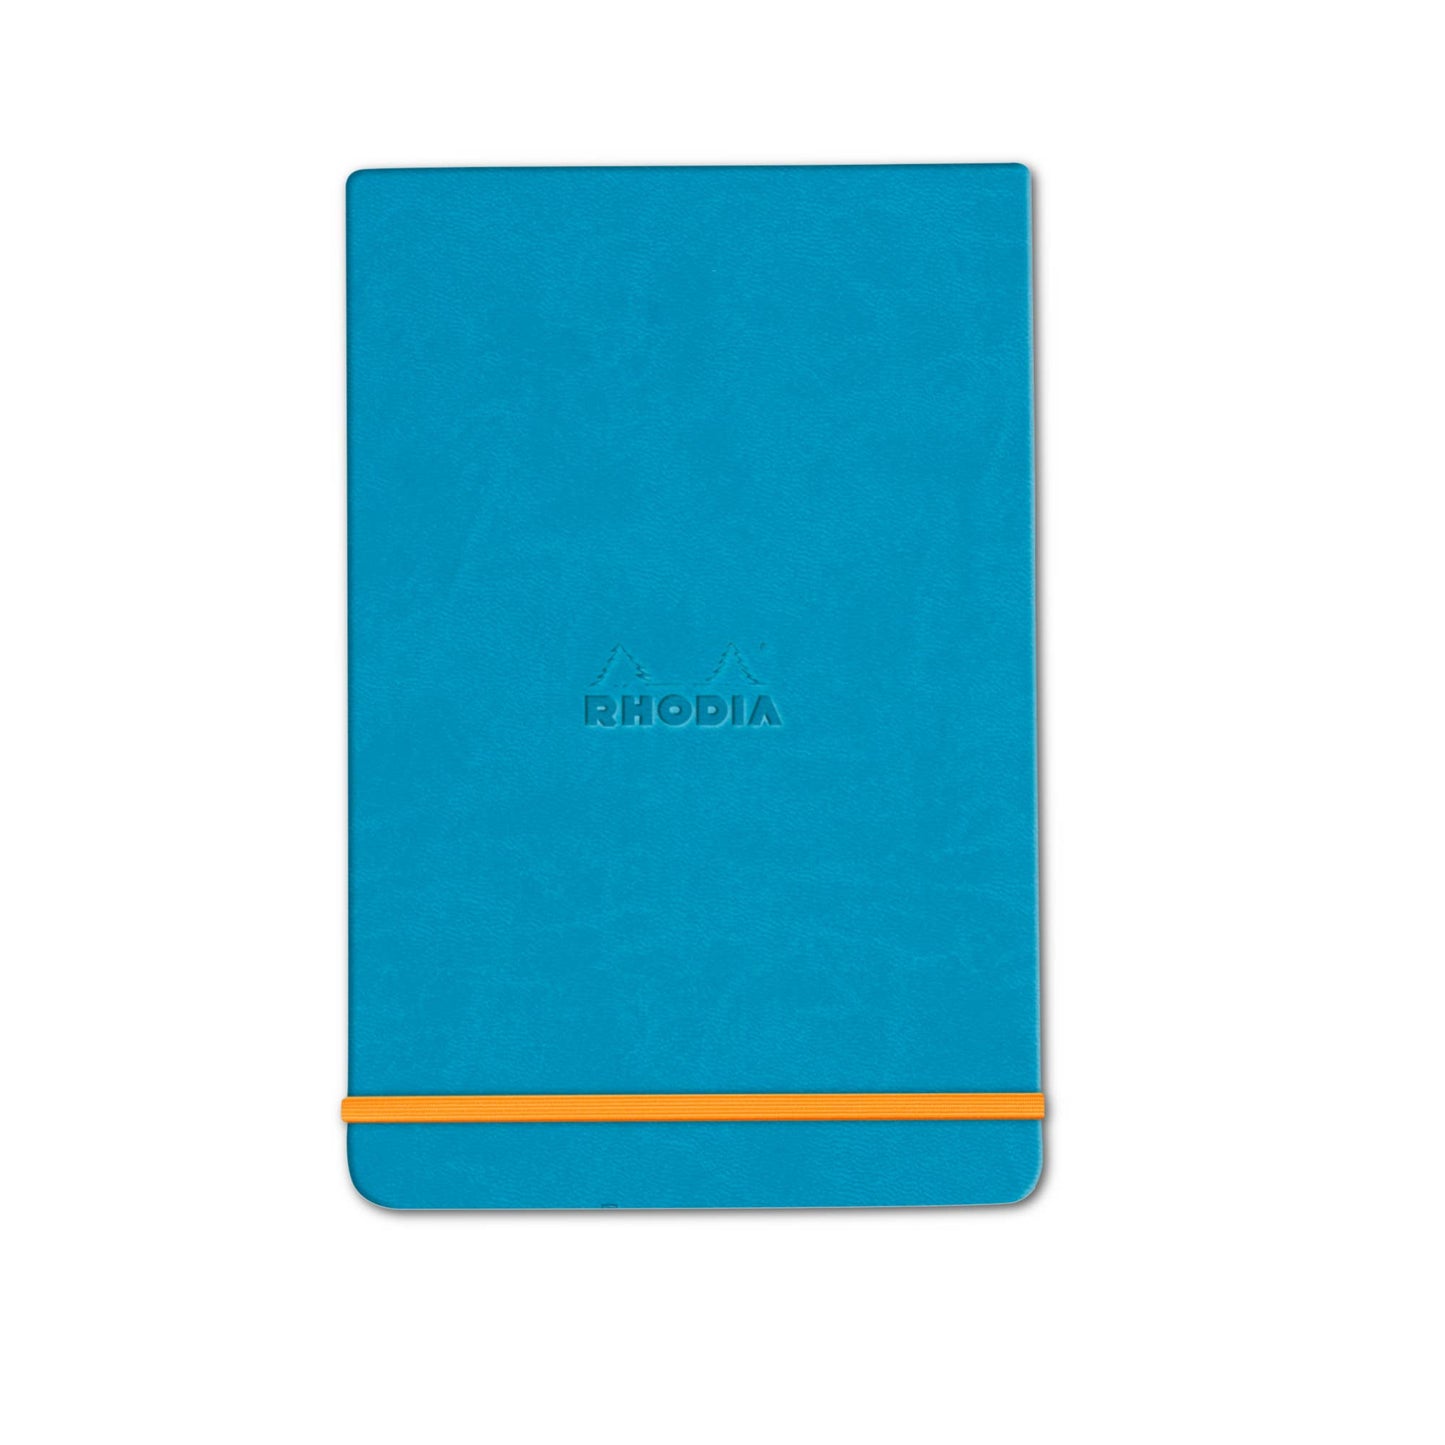 Rhodia Webnotepad - Reporter Style: A5 / Turquoise